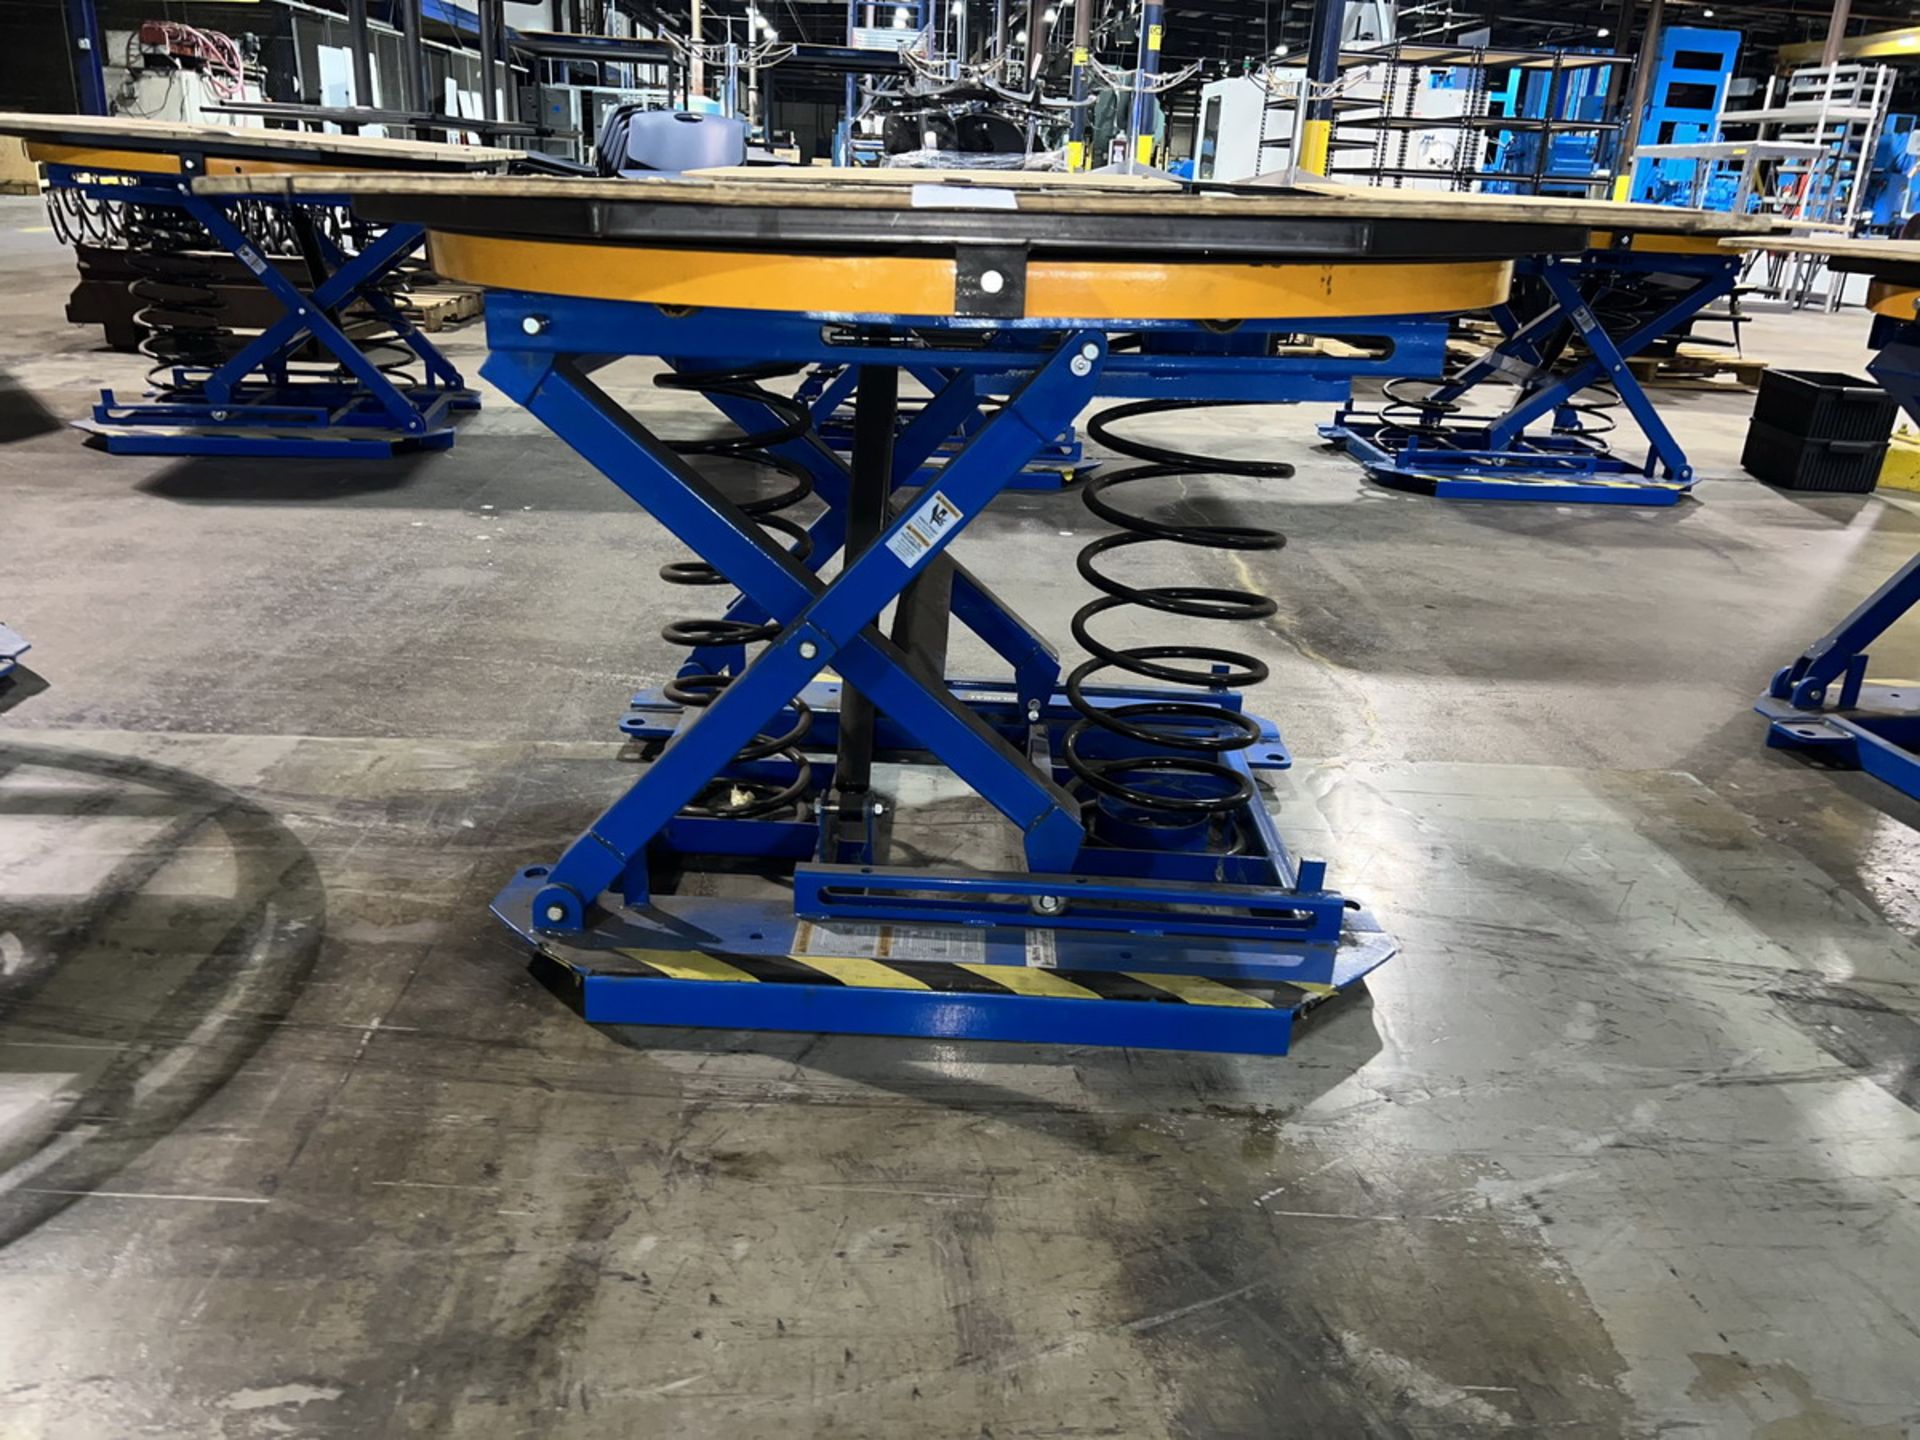 Global 4500Lb. 44" Spring Loaded Rotary Lift Table - Image 2 of 3